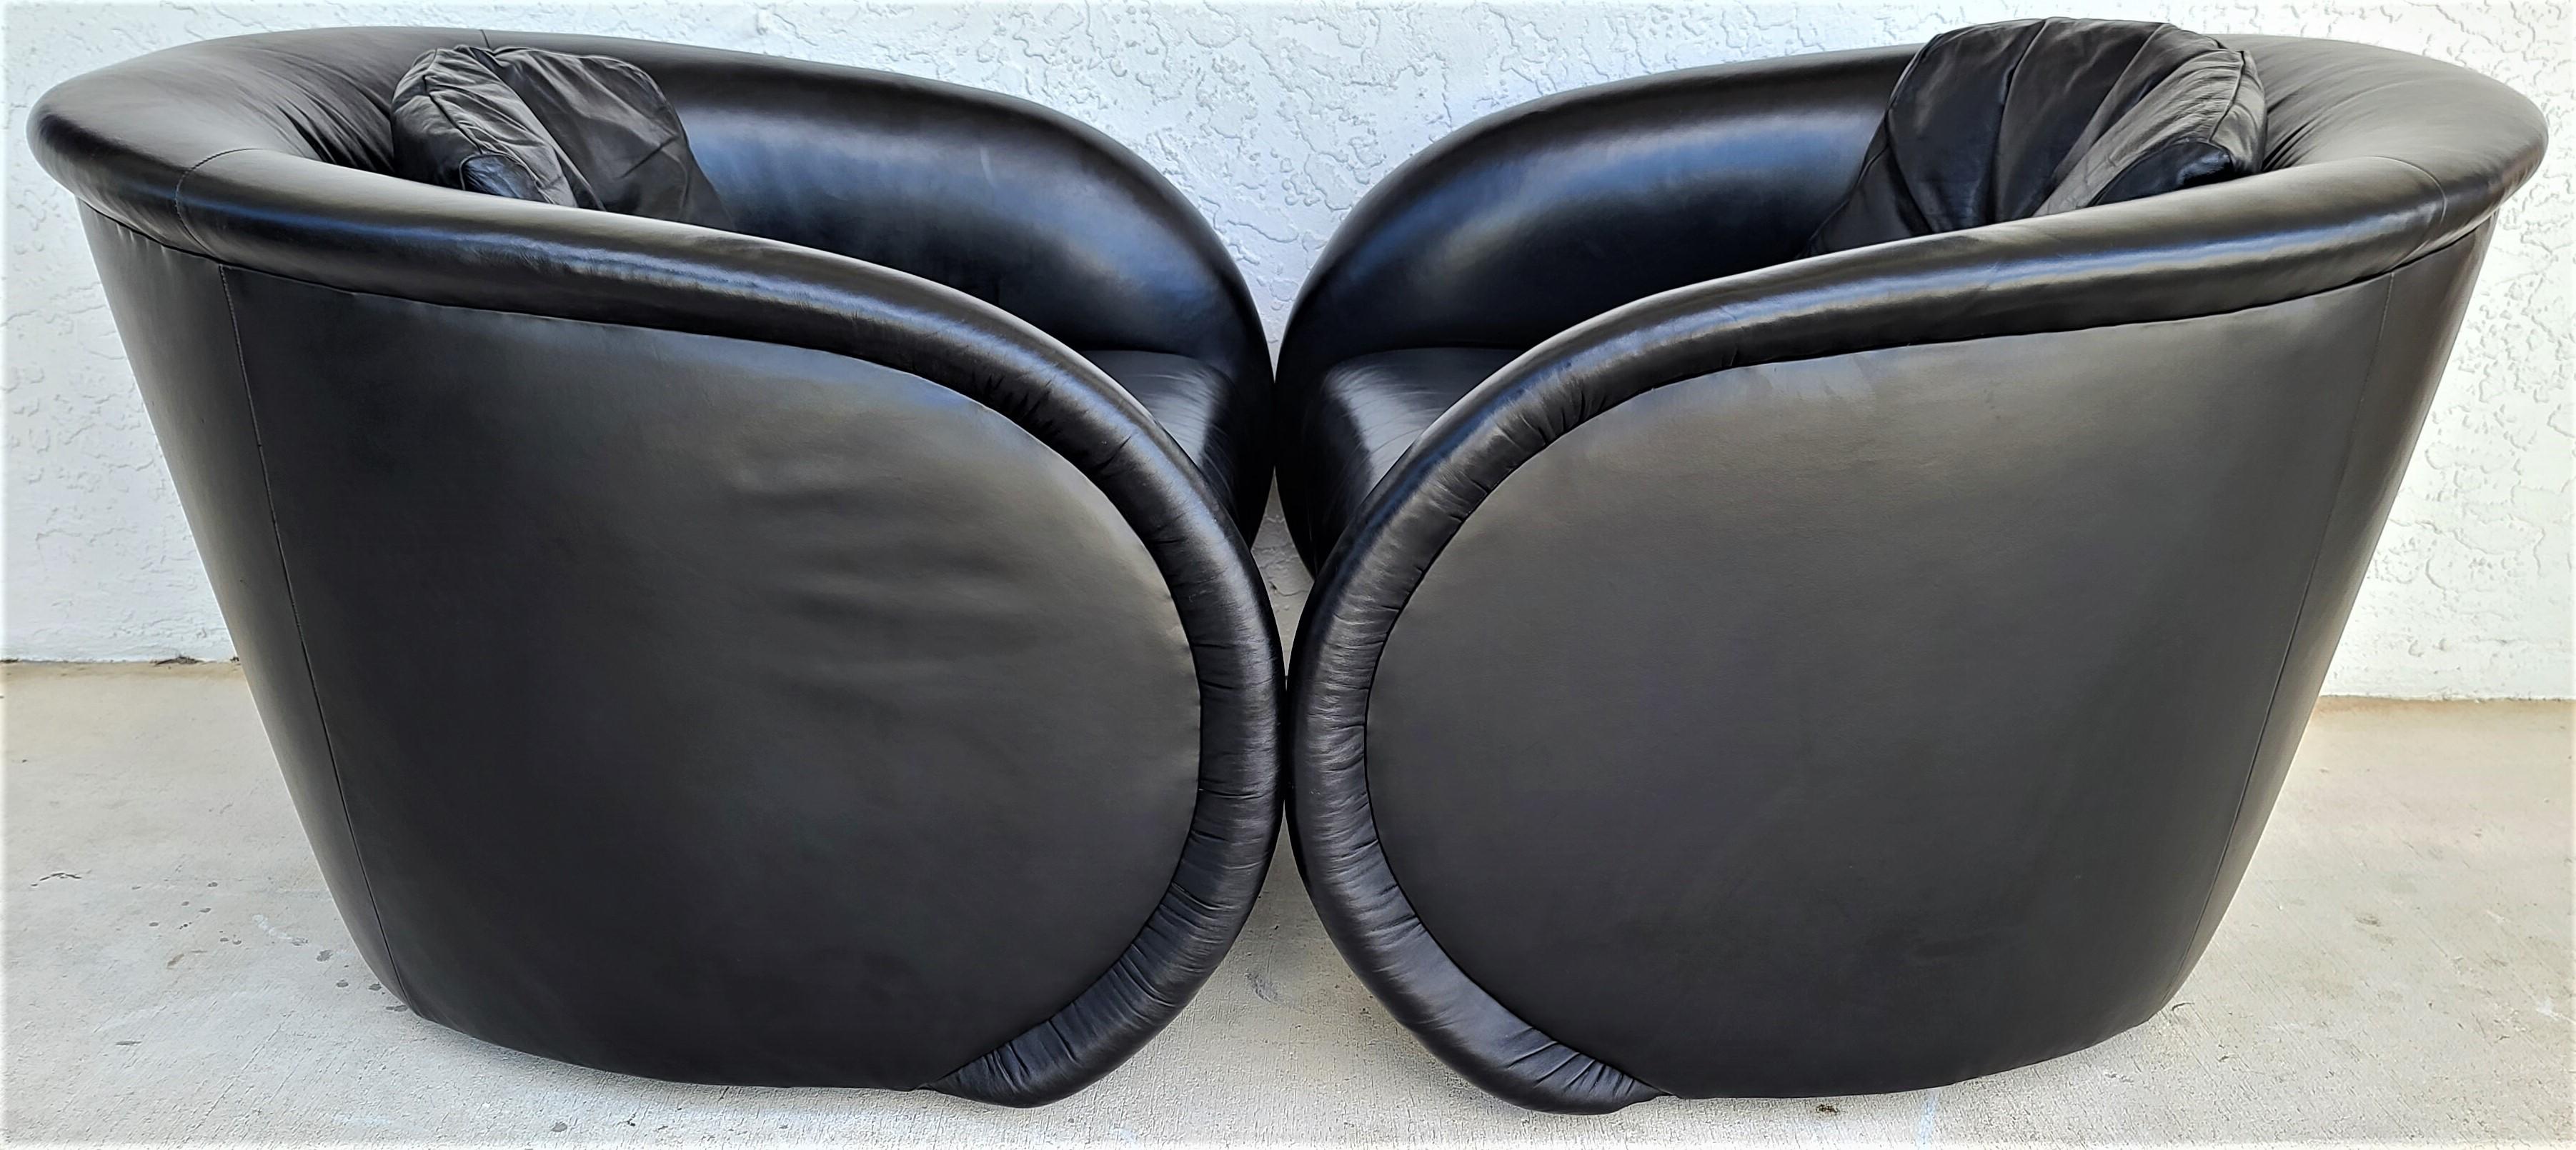 Offering One Of Our Recent Palm Beach Estate Fine Furniture Acquisitions Of A
Set of 2 Mid-Century Modern black leather swivel Barrel lounge chairs by Preview
Spectacularly designed chairs with a style that will never go out of fashion and made of